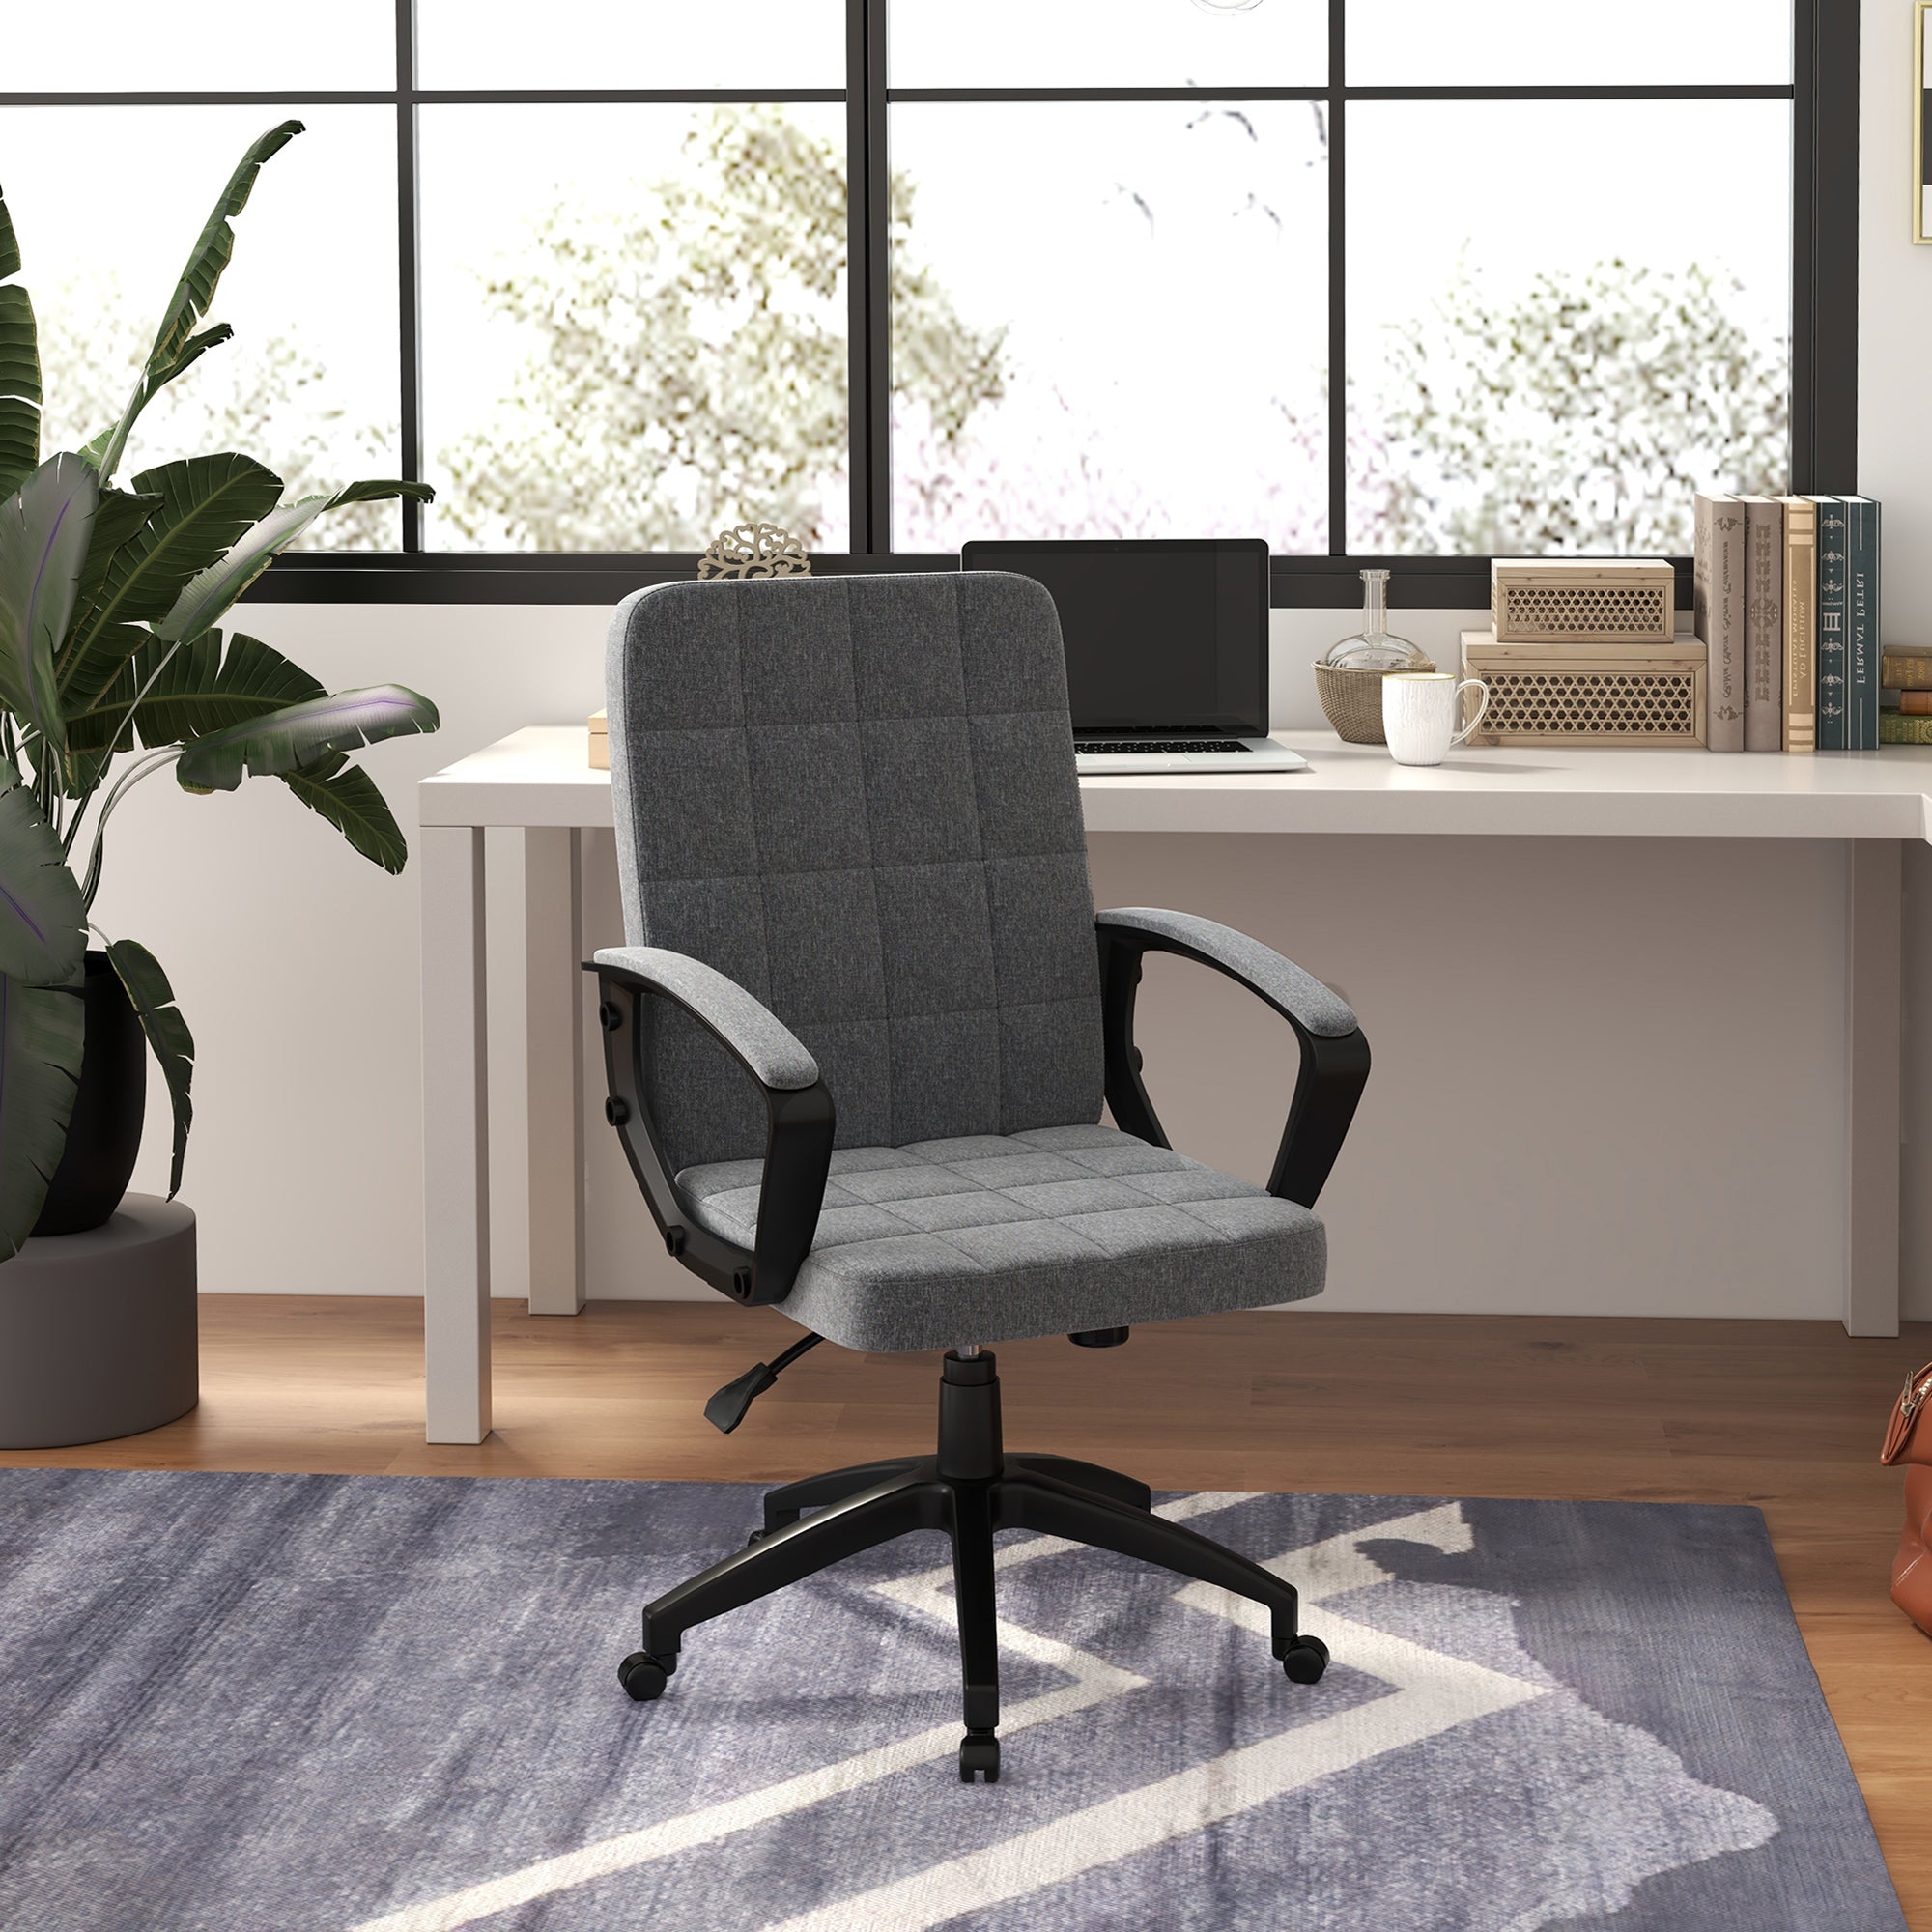 Executive Office Chair, Adjustable Height, Swivel Wheels, Mid Back, Charcoal Gray